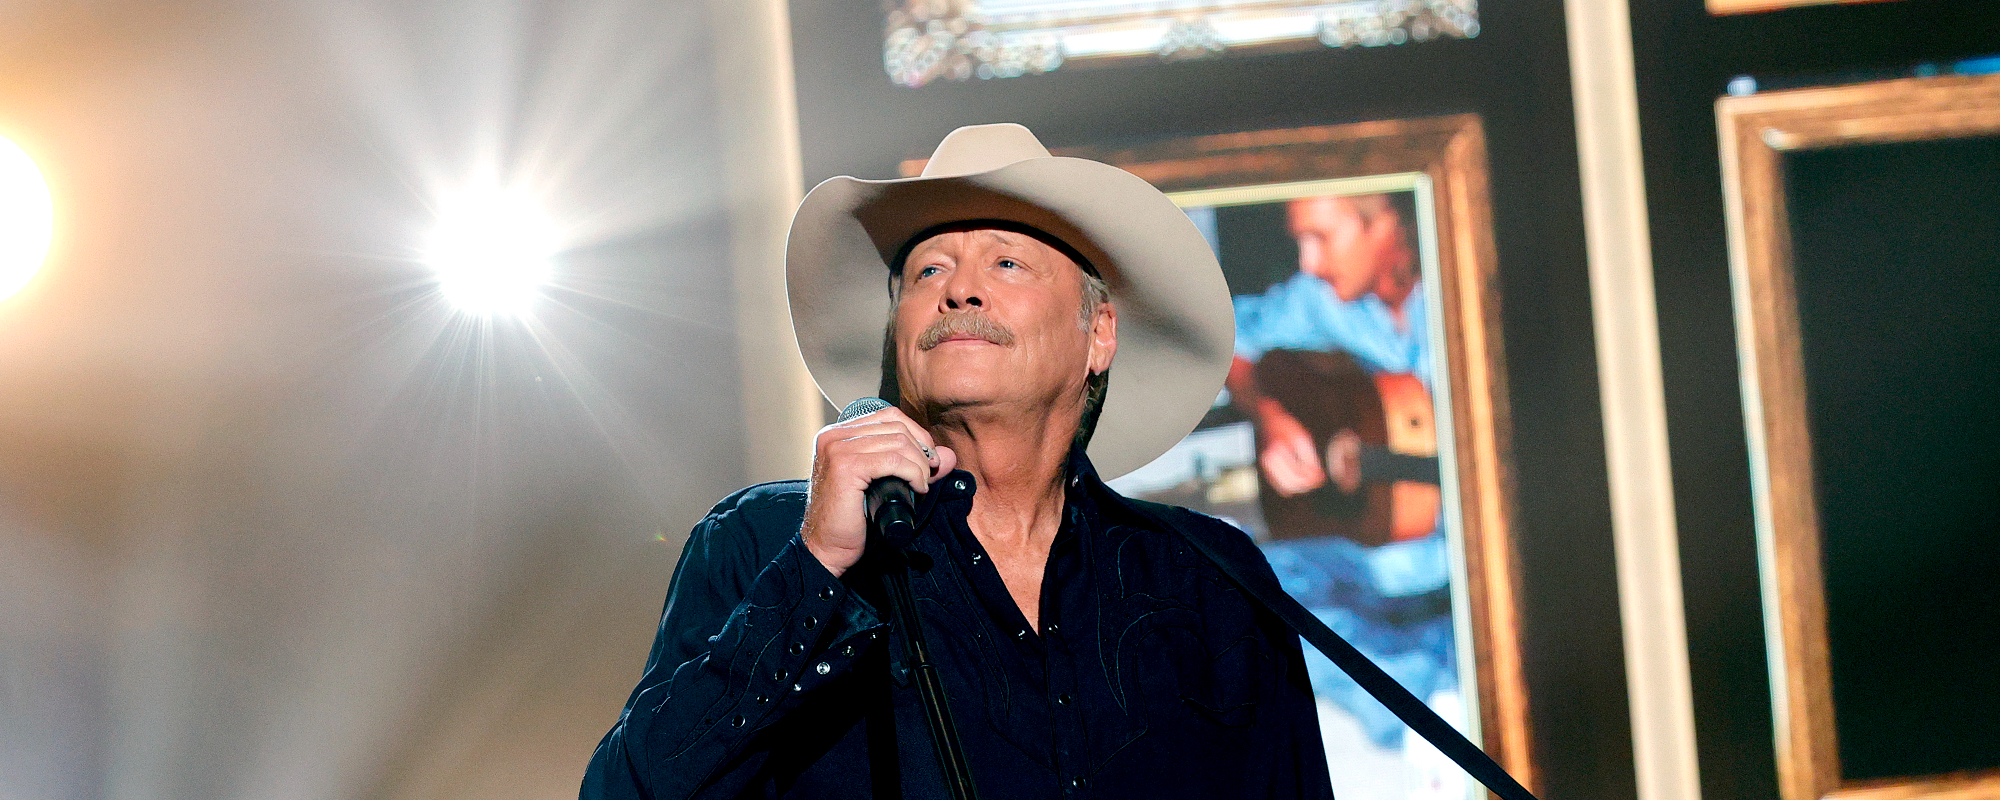 Look: Alan Jackson and Wife Denise Share Photo Celebrating 44 Years of Marriage